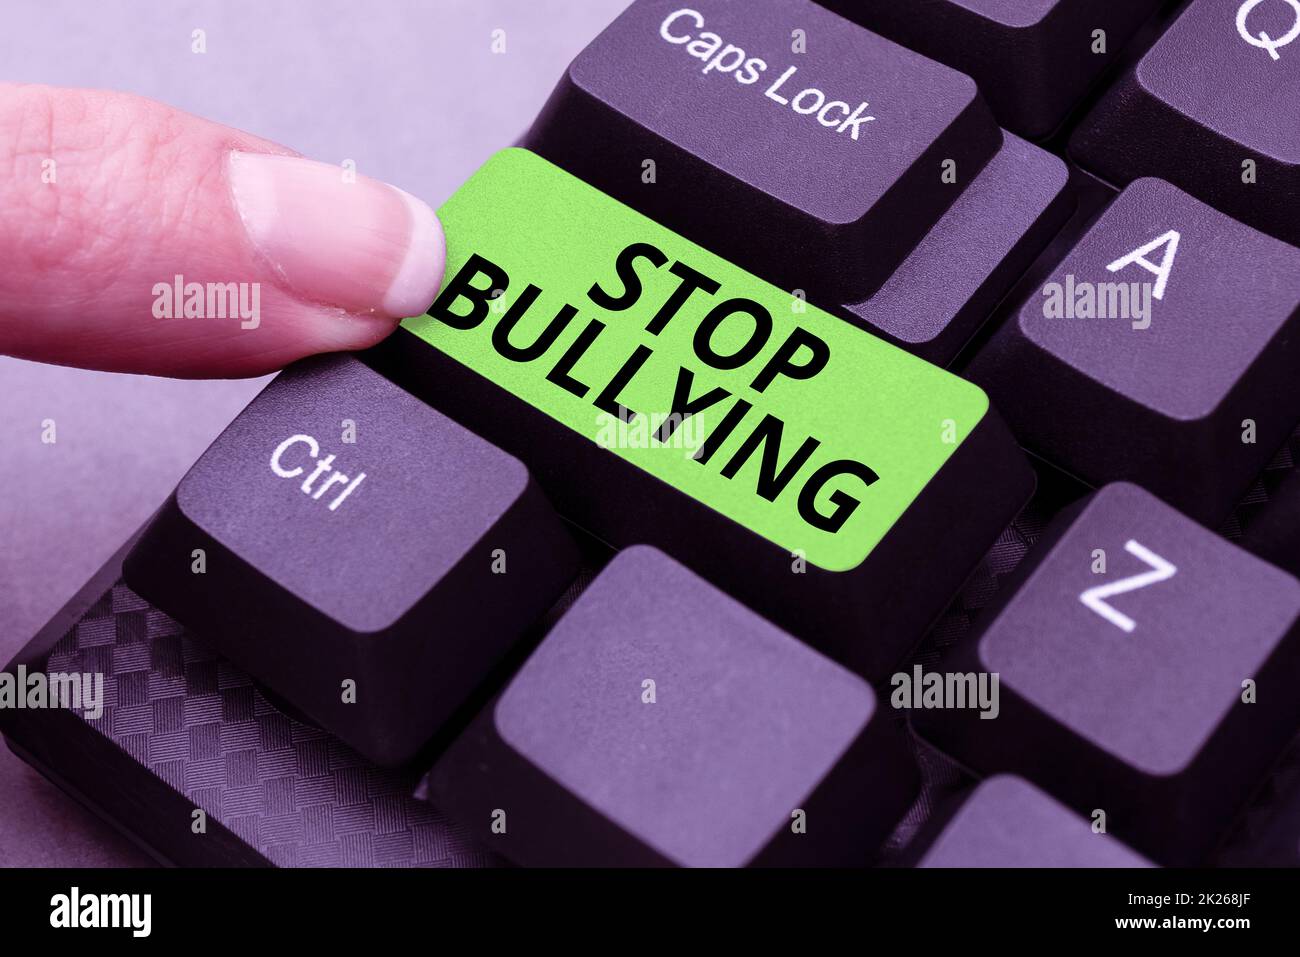 Handwriting text Stop Bullying. Business concept Fight and Eliminate this Aggressive Unacceptable Behavior Abstract Gathering Investigation Clues Online, Presenting Internet Ideas Stock Photo